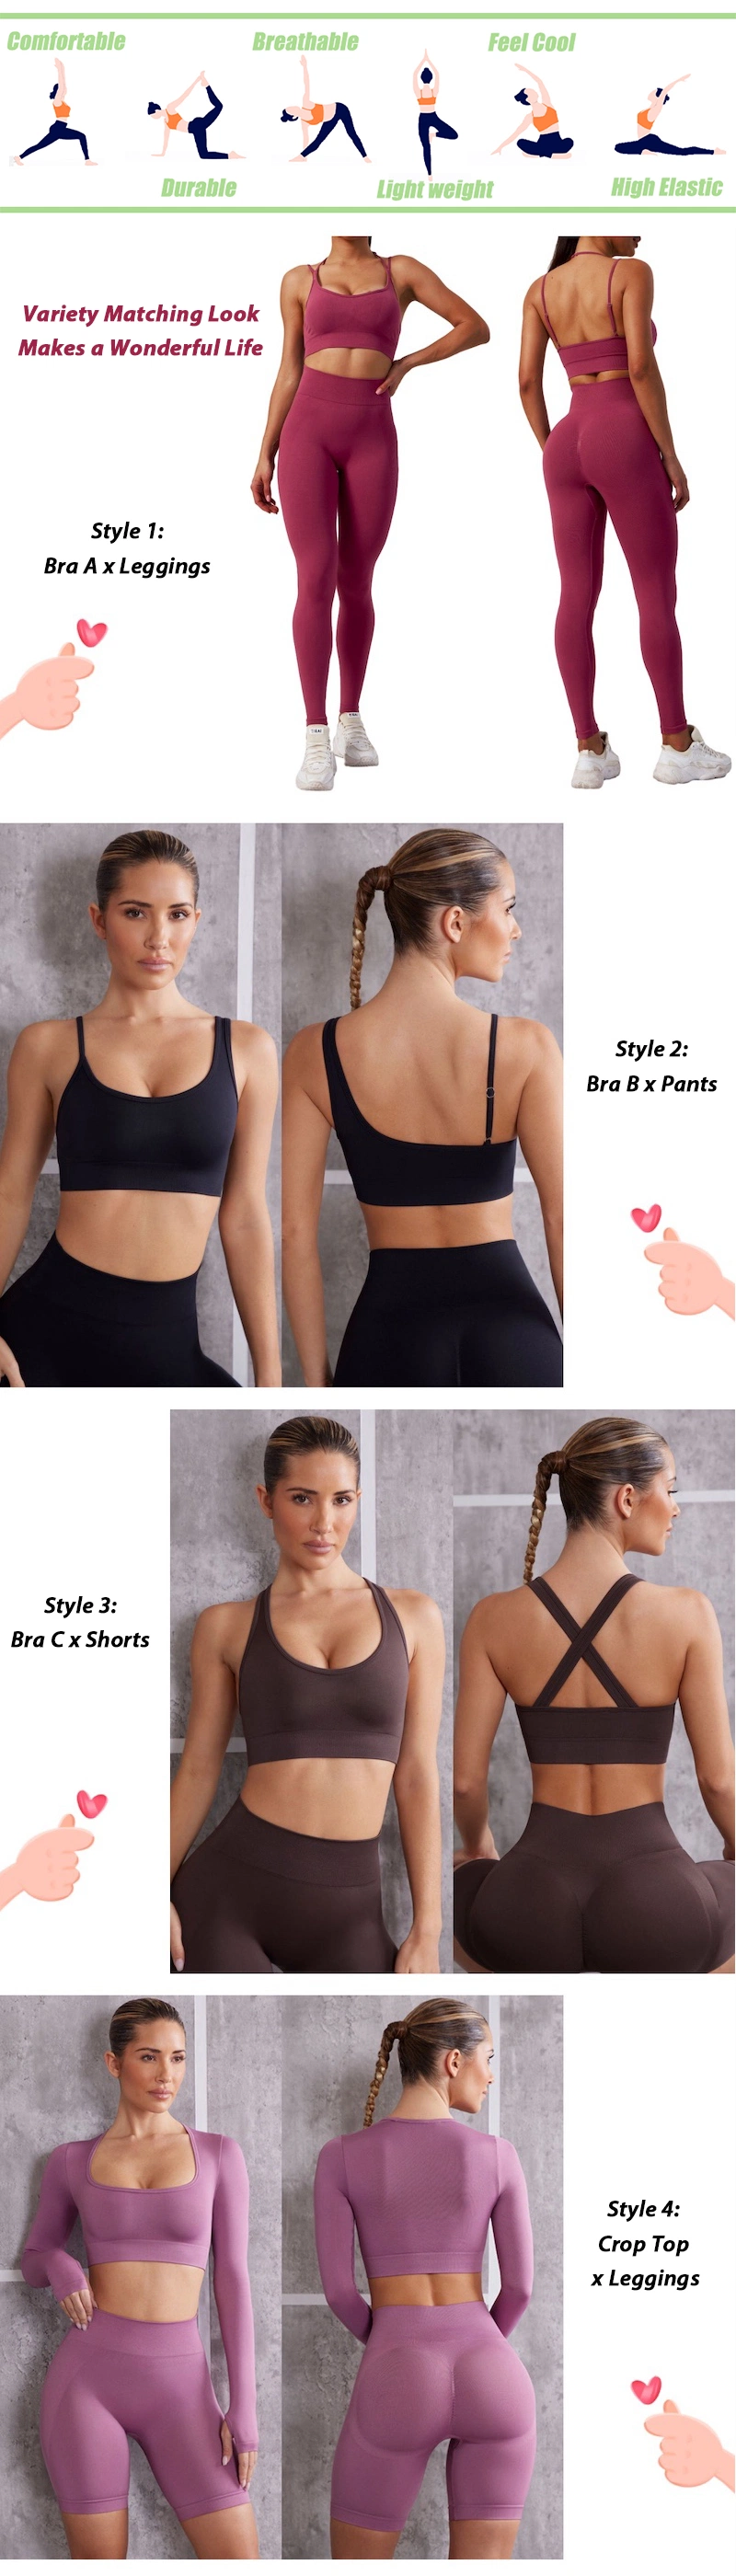 New Fancy 6PCS Workout Sets Seamless Yoga Fitness Clothing for Women, Sexy Gym Top with High Waisted Biker Shorts + Yoga Pants Ropa De Activewear